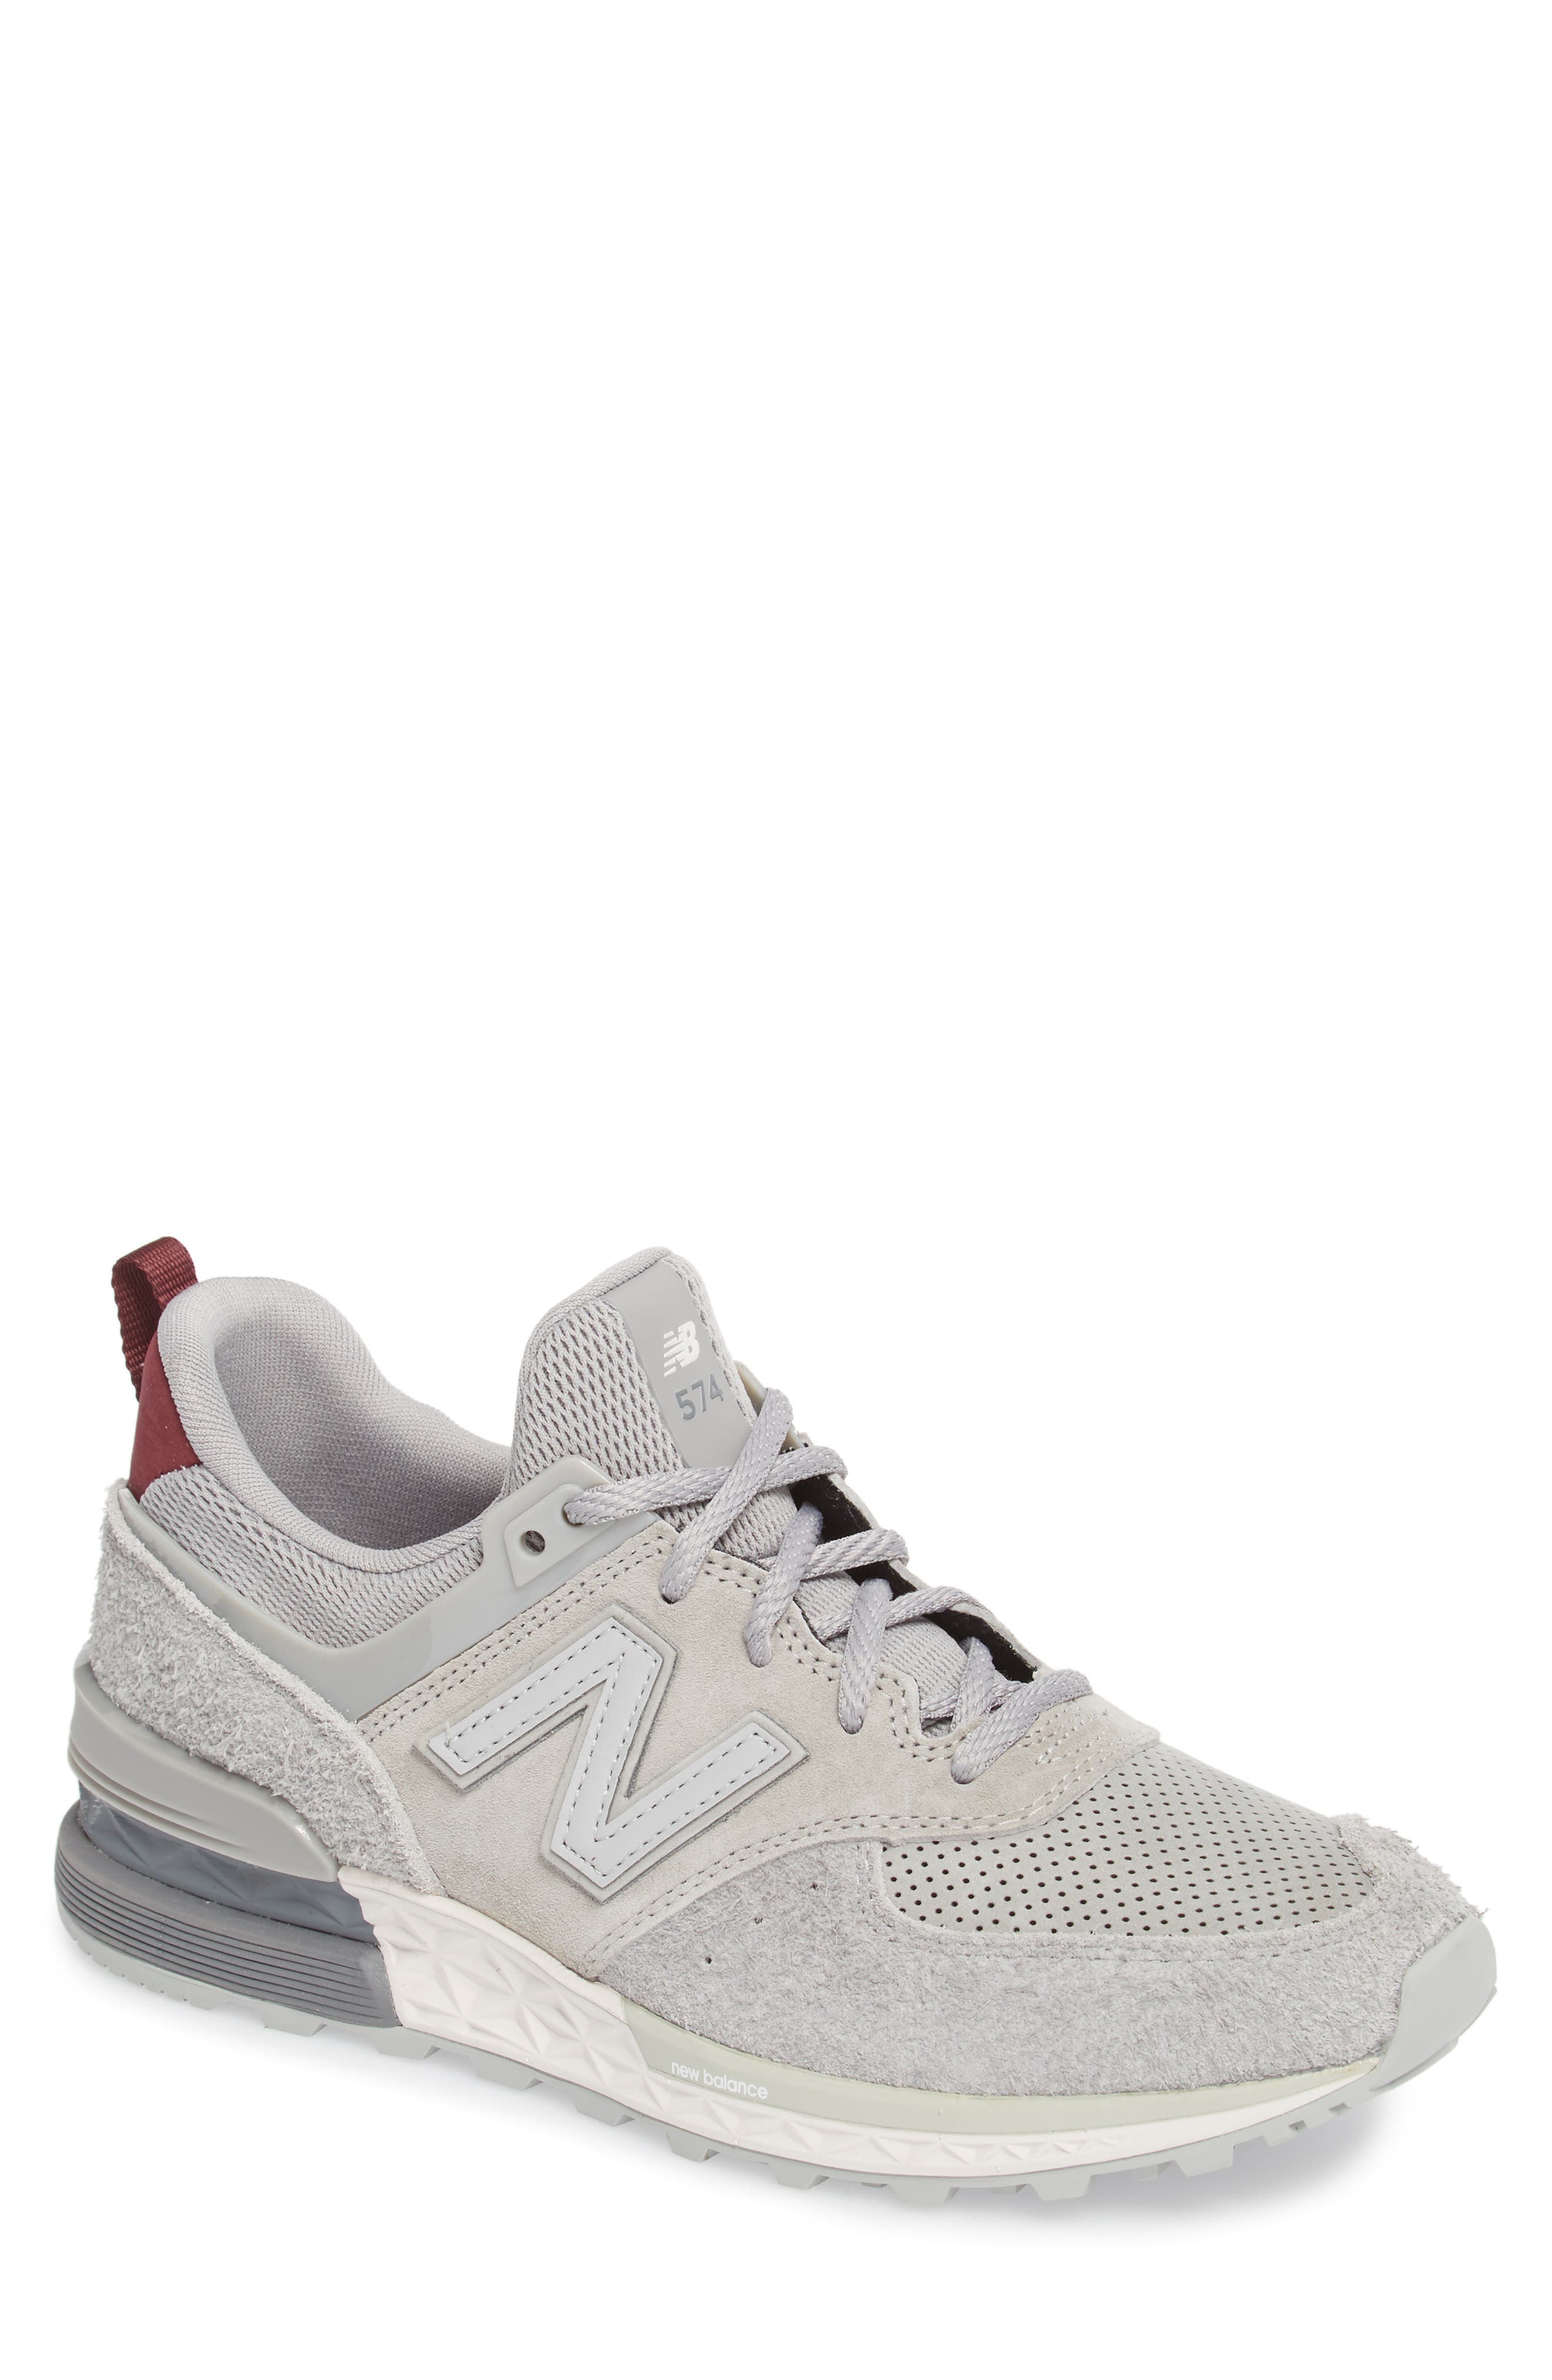 new balance 574 sport tier 1 for sale